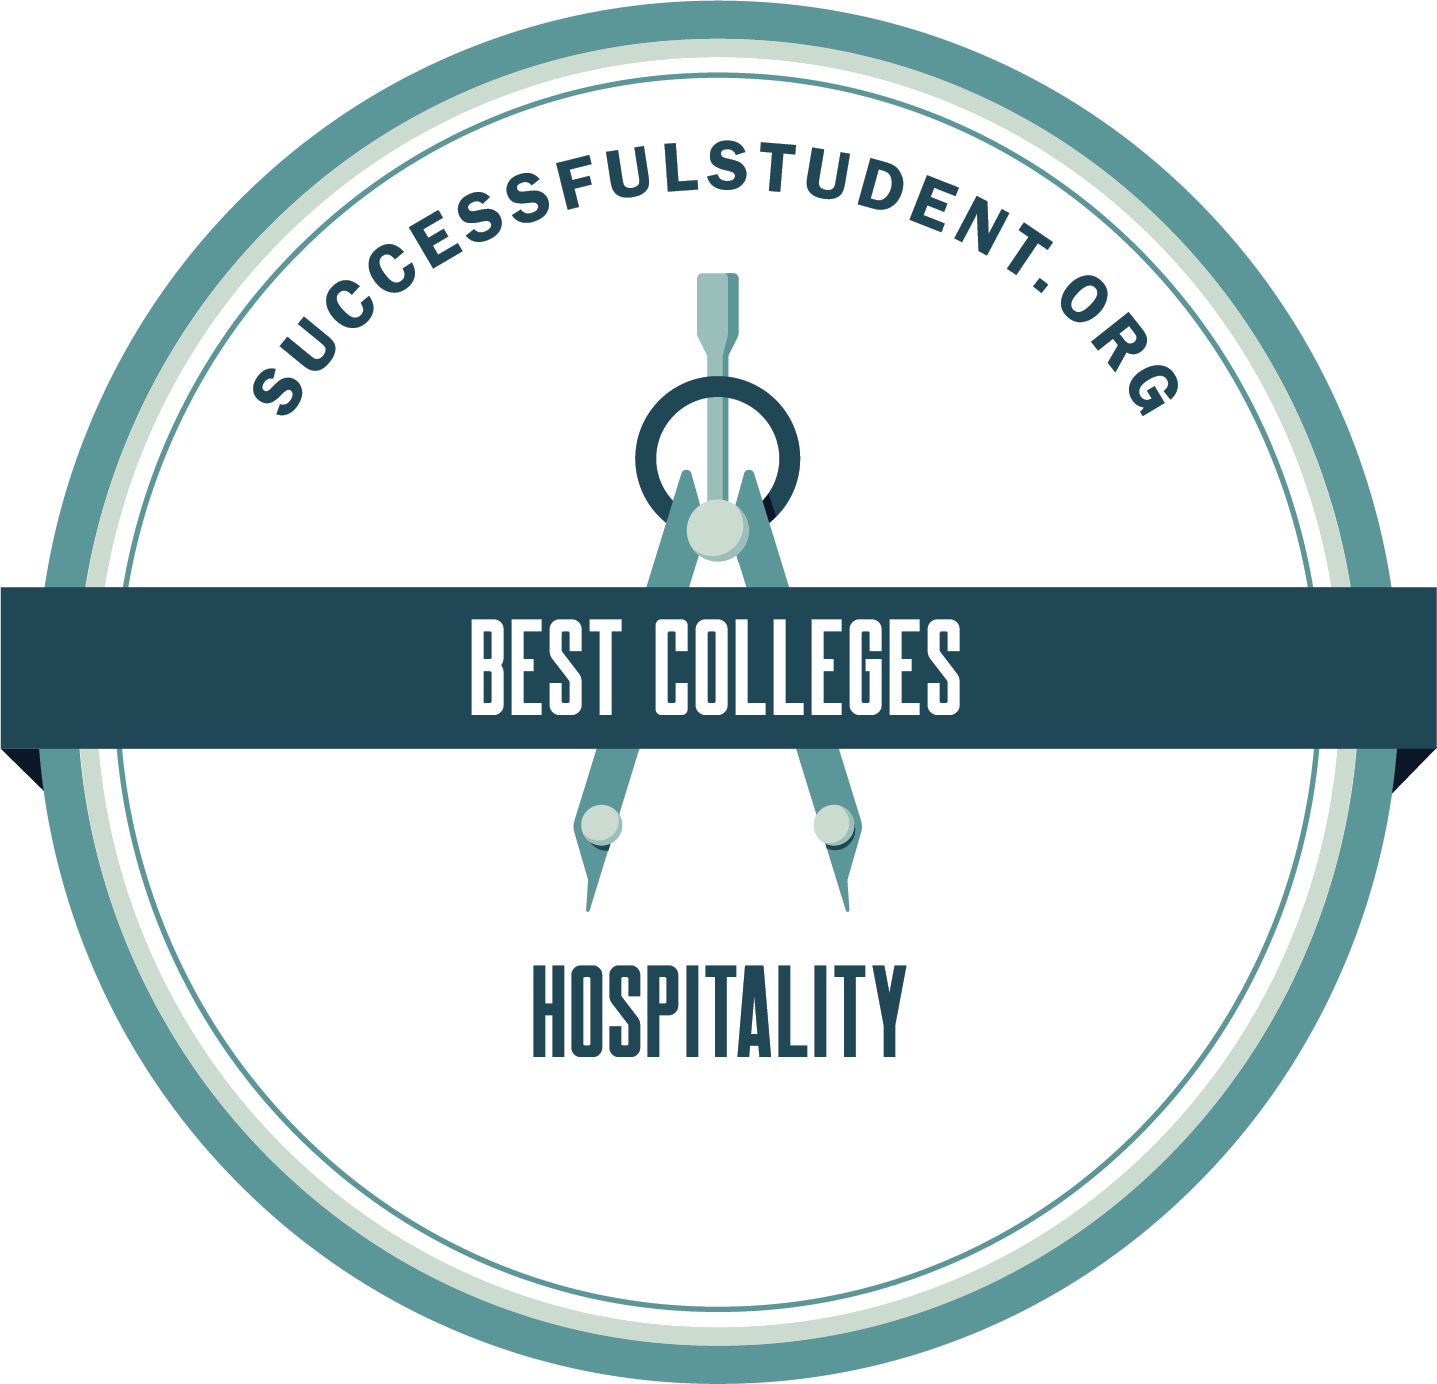 The 25 Best Hospitality Colleges in the US's Badge